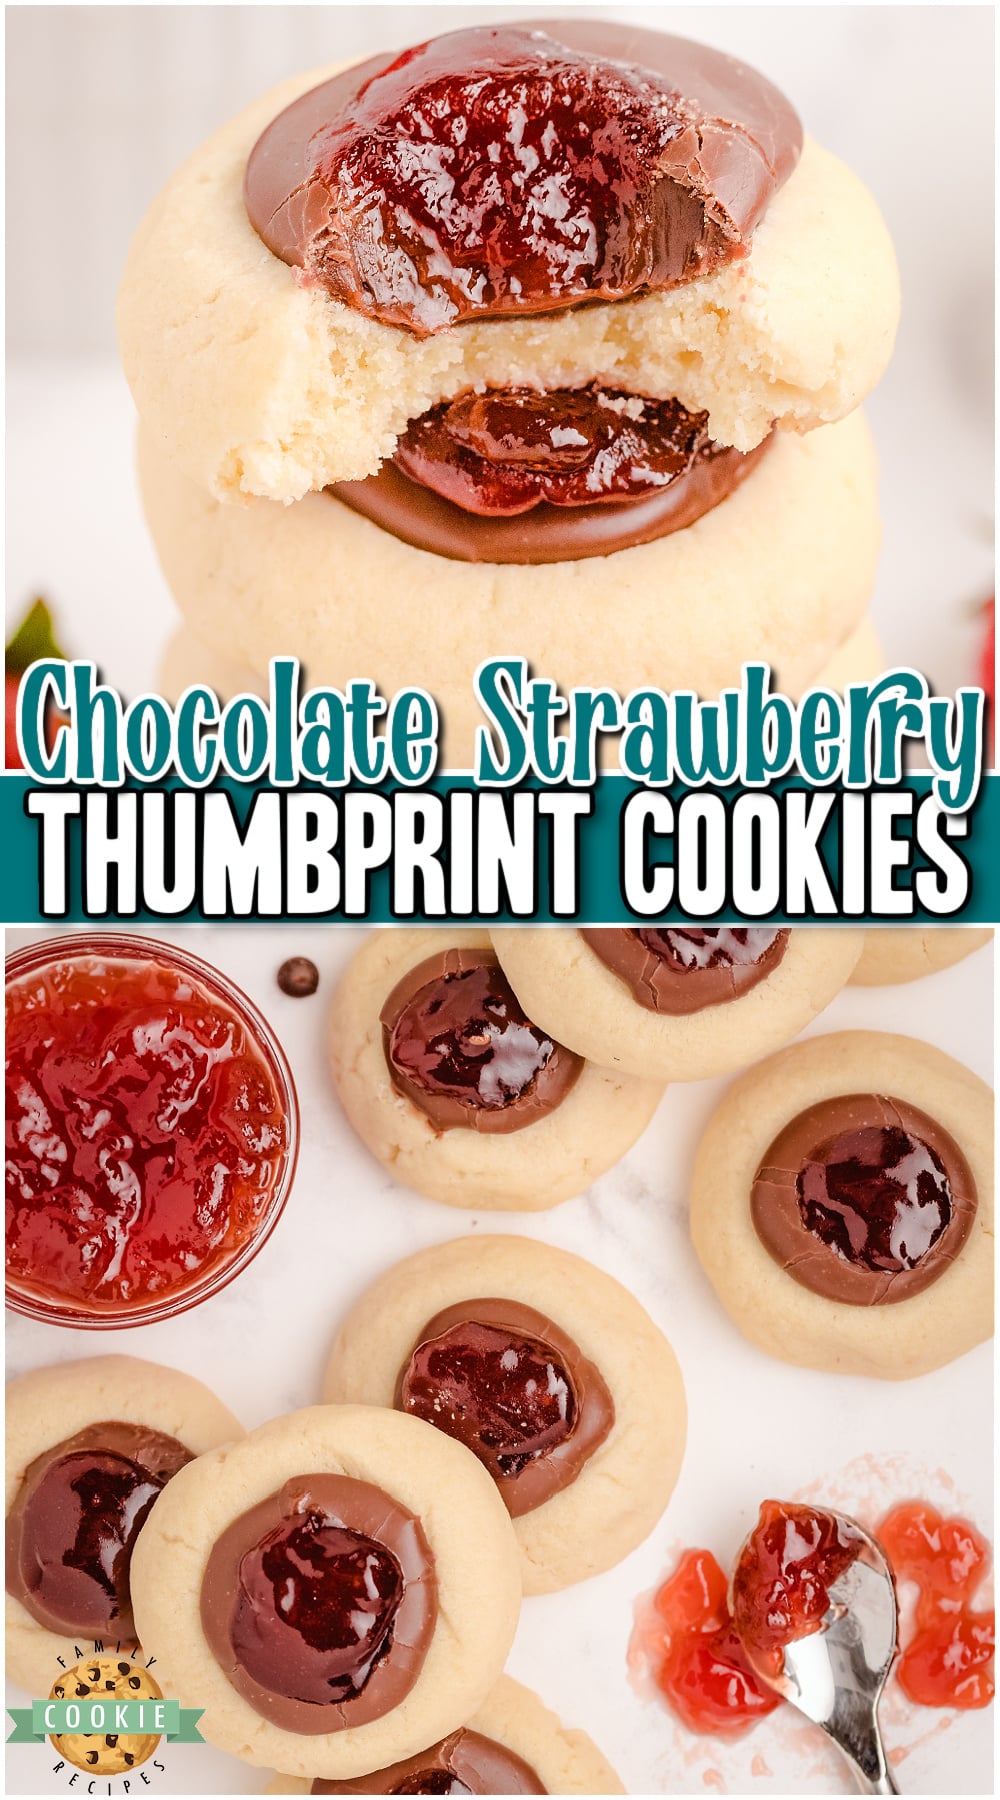 Chocolate Strawberry Thumbprint Cookies made with a buttery cookie & topped with chocolate fudge & strawberry jam! It's a chocolate covered strawberry in cookie form!